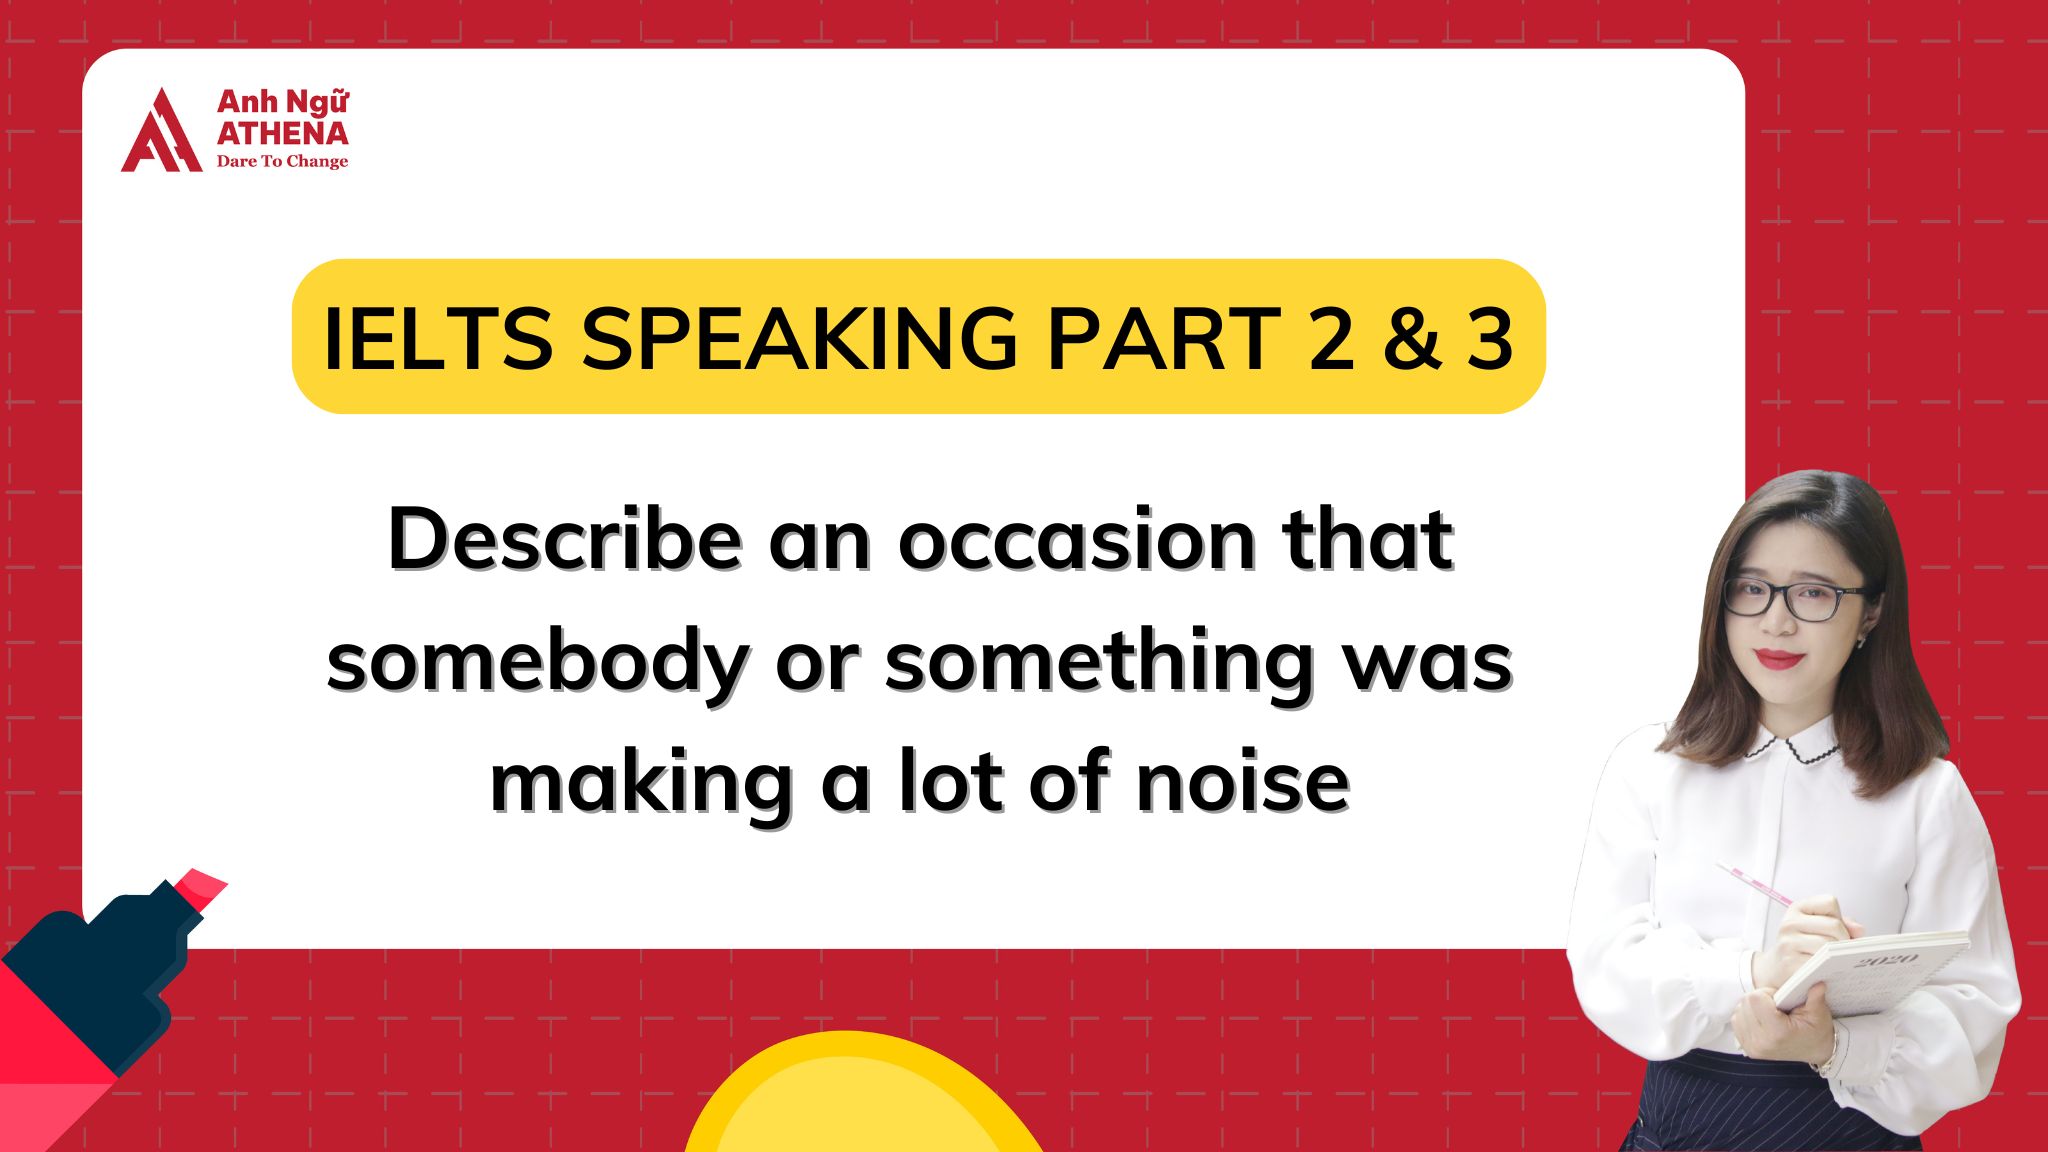 Giải đề: Describe an occasion that somebody or something was making a lot of noise